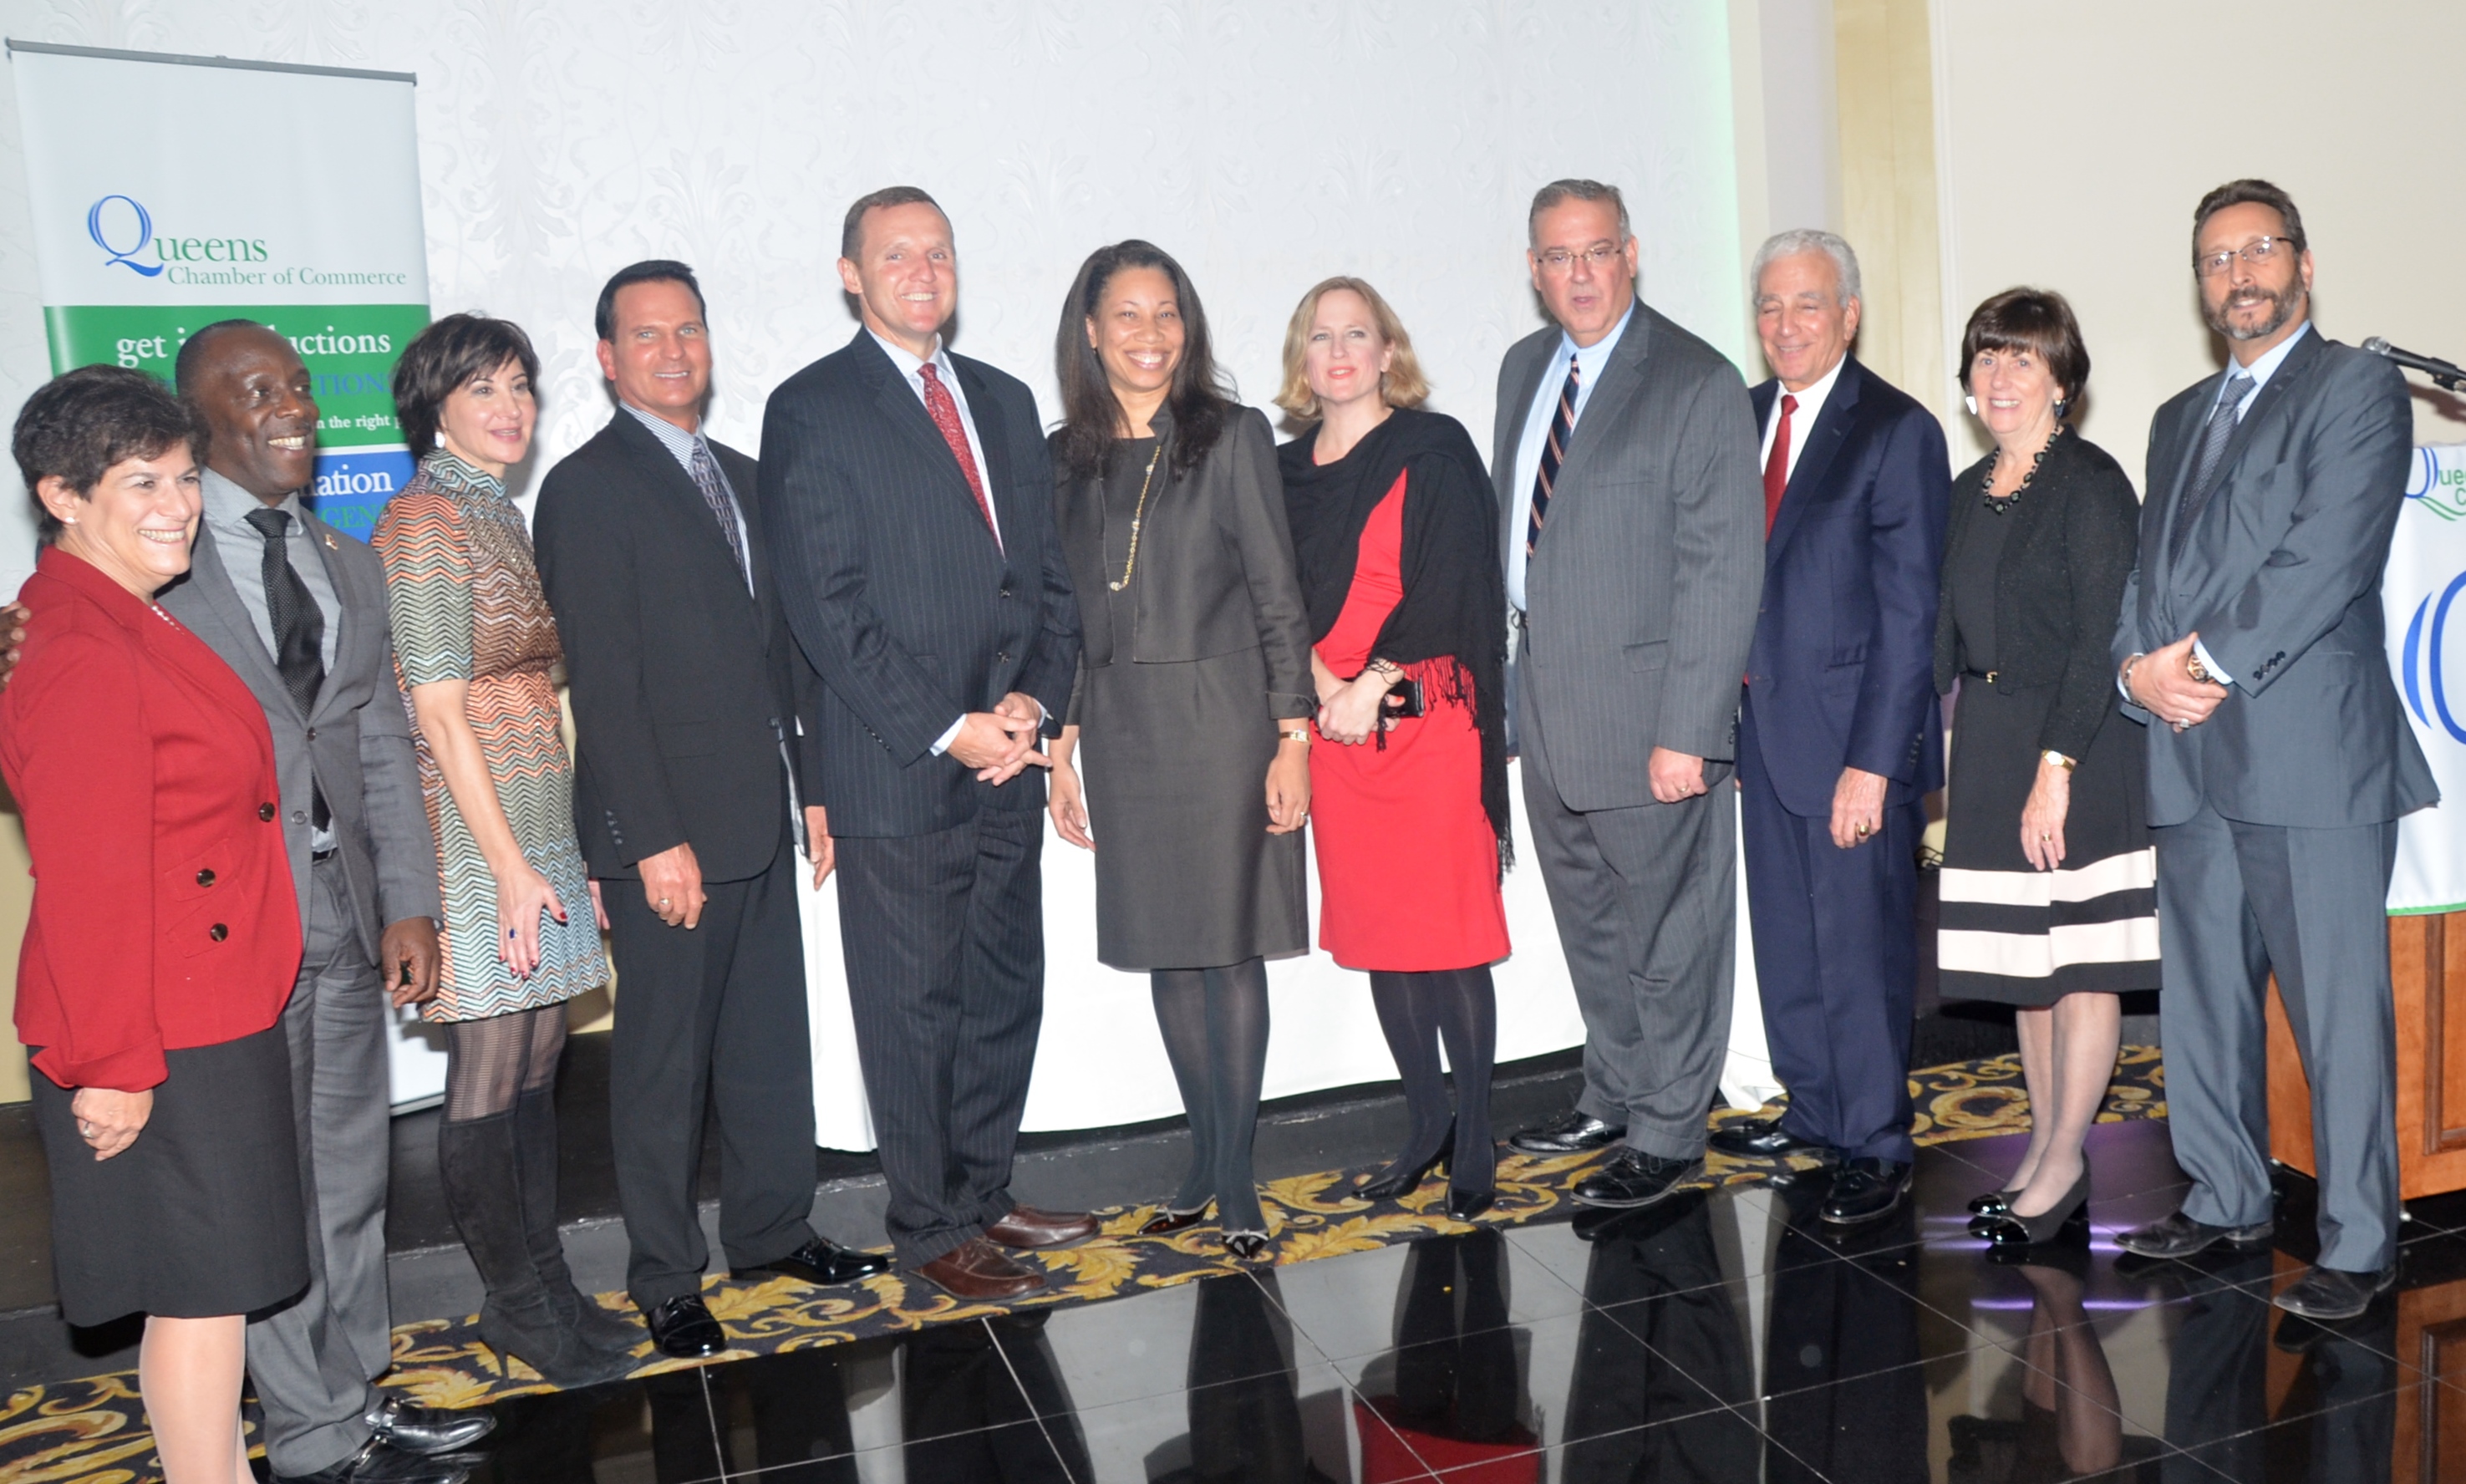 Honorees pose with pols who presented their awards and Chamber executives.